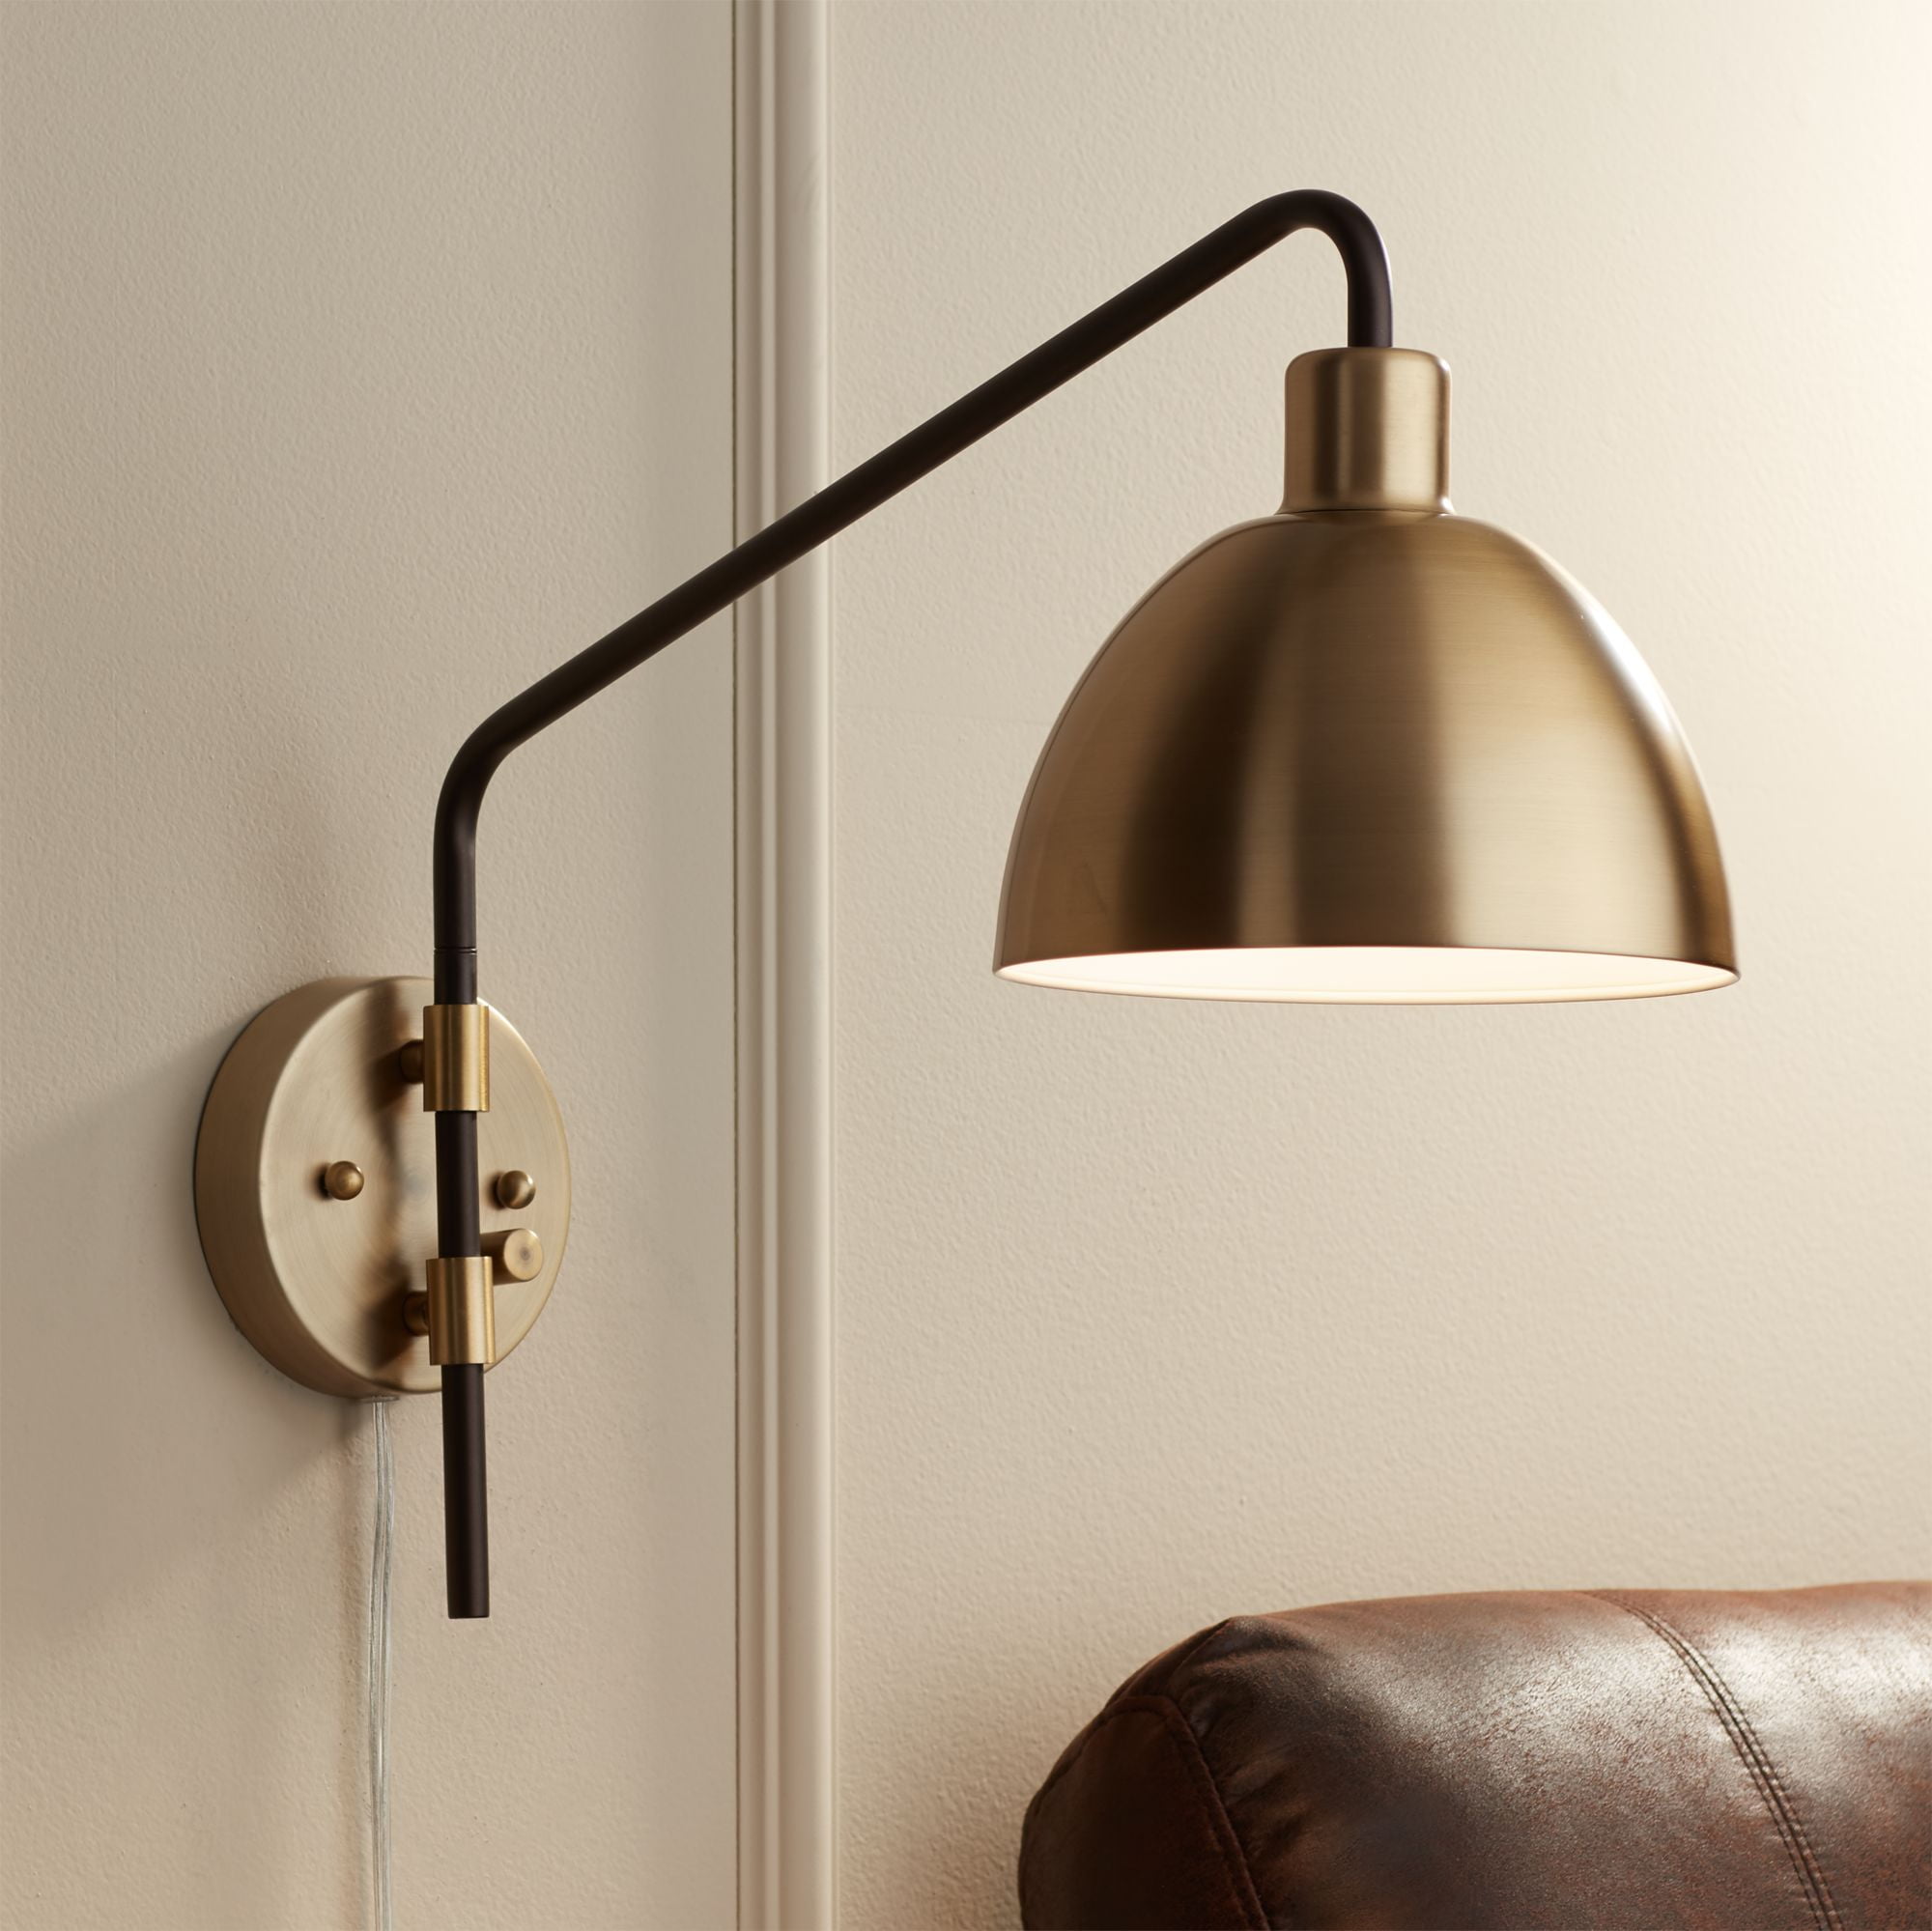 Brushed Brass Metal Adjustable Wall Light Industrial Barn Swing Arm Wall Sconce 